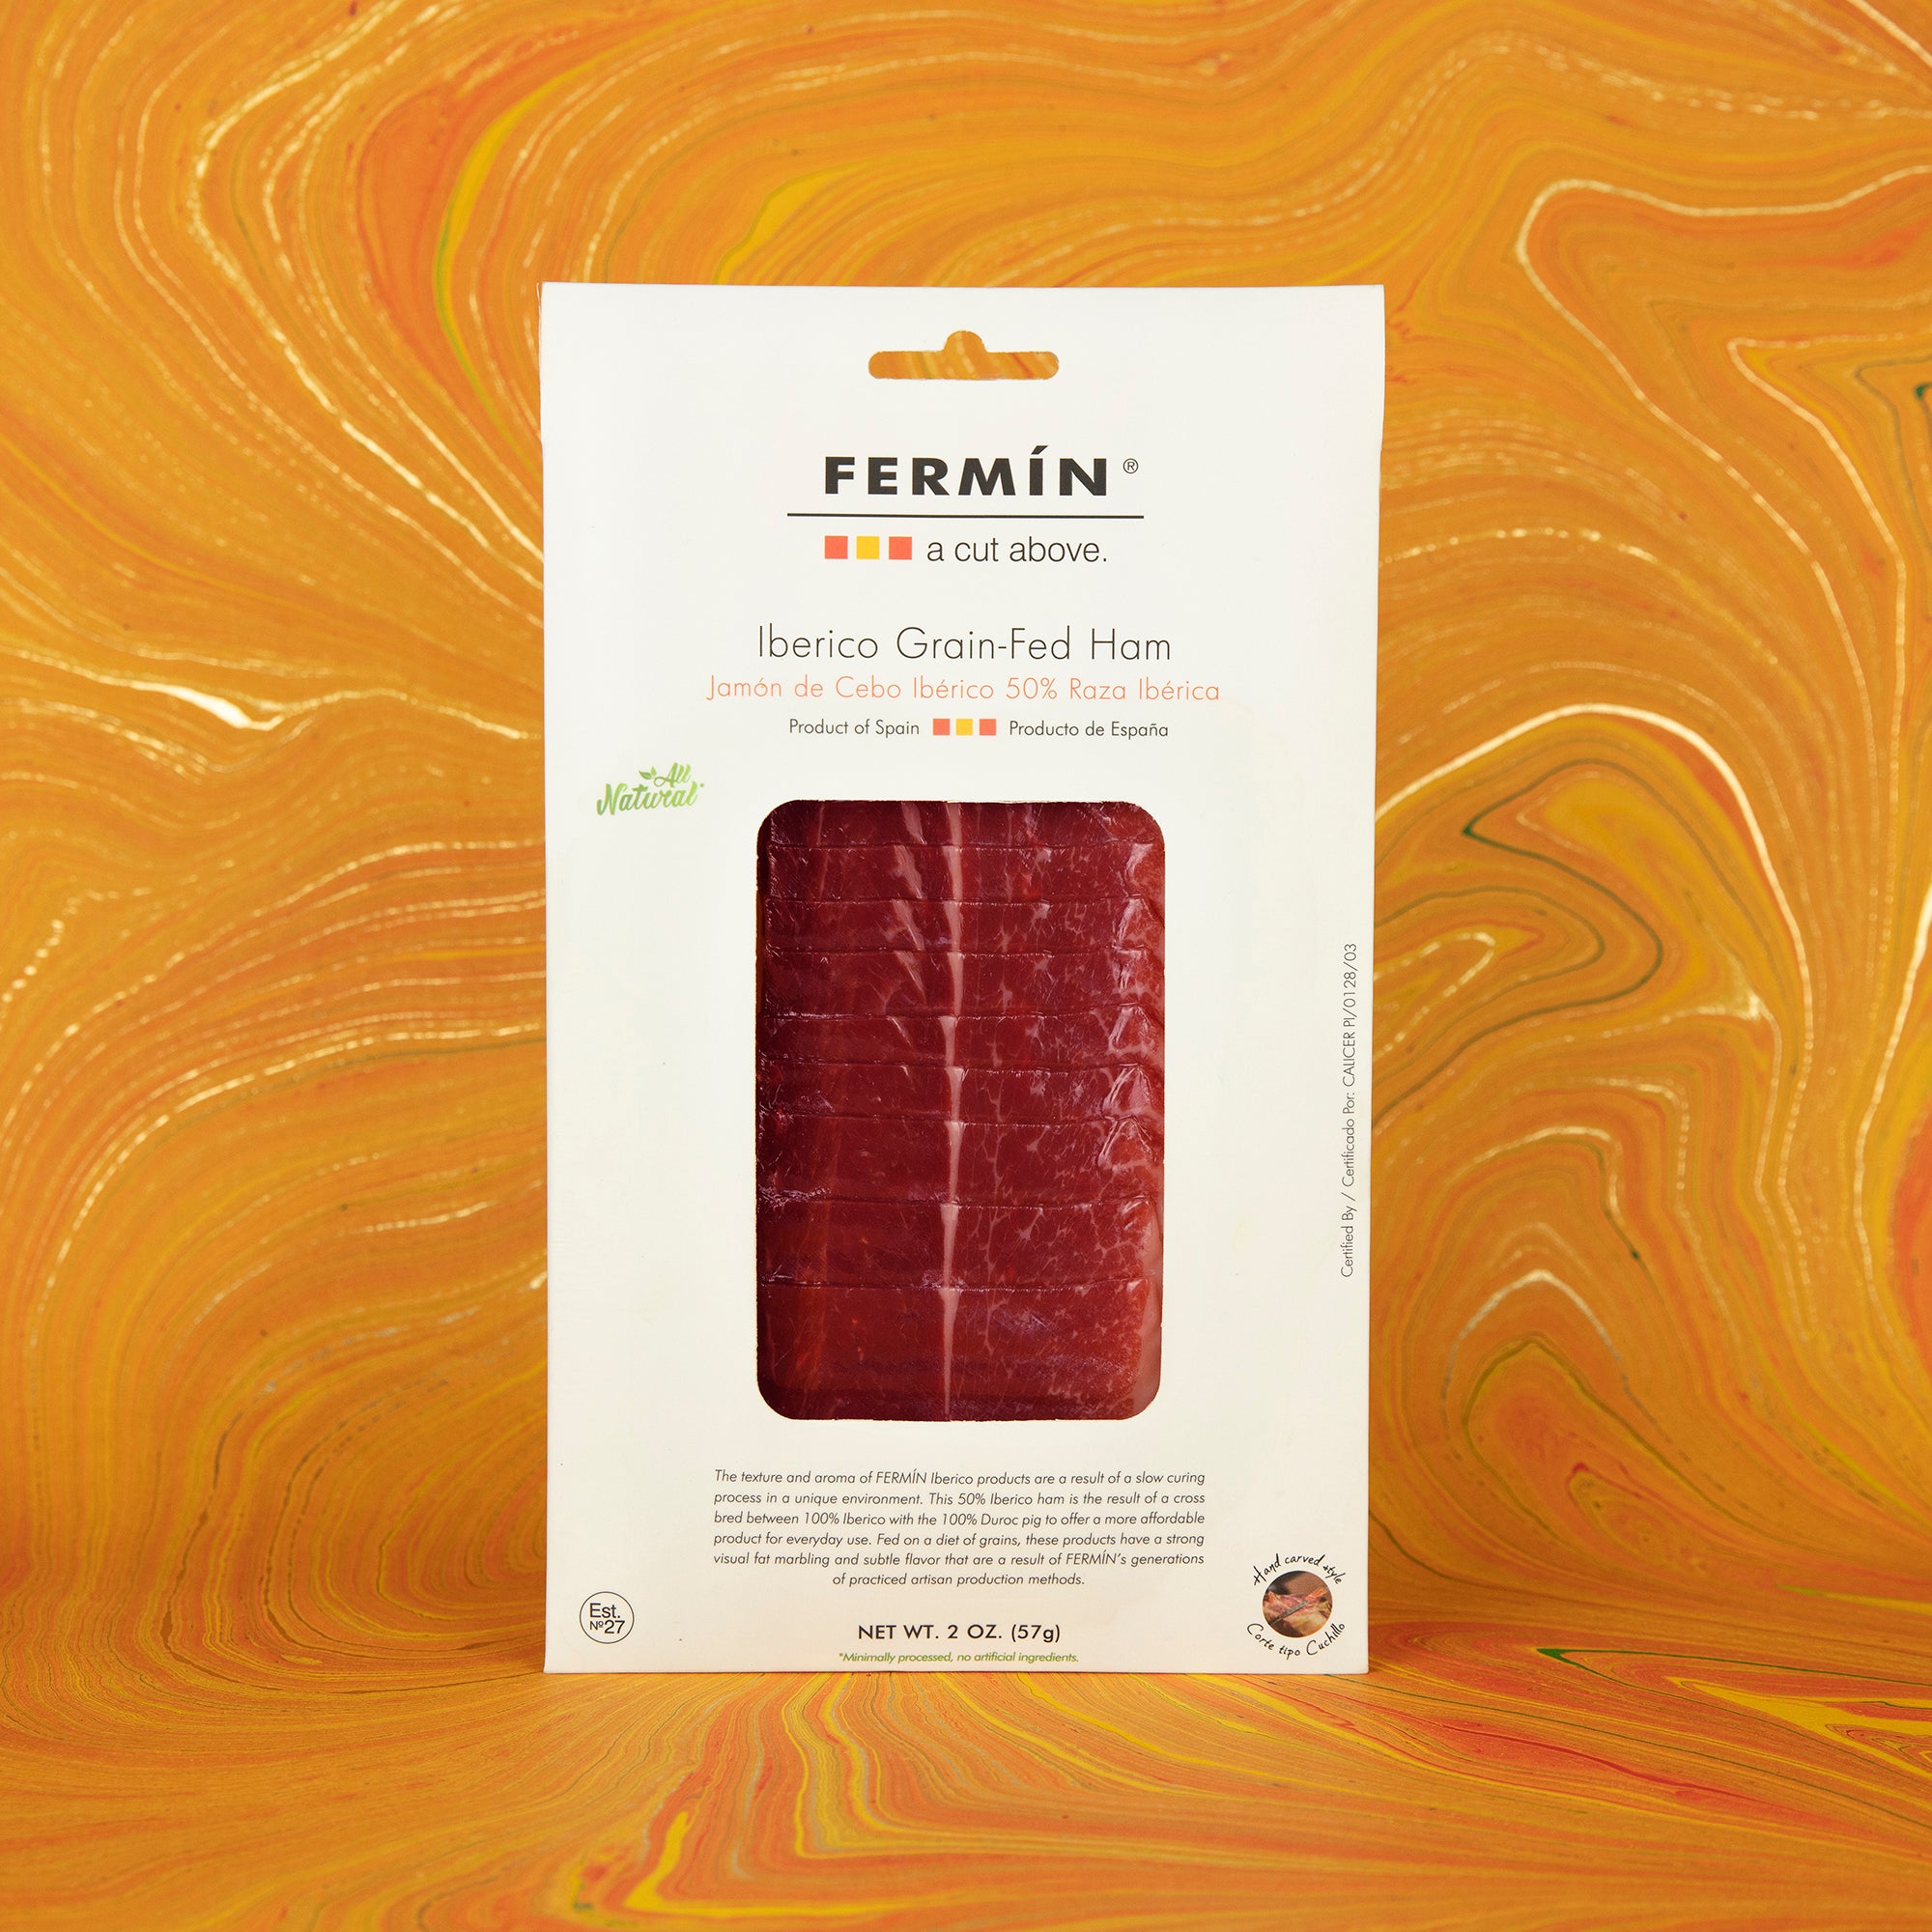 Product image of a pack of pre-sliced jamón ibérico from the brand of Fermin. 